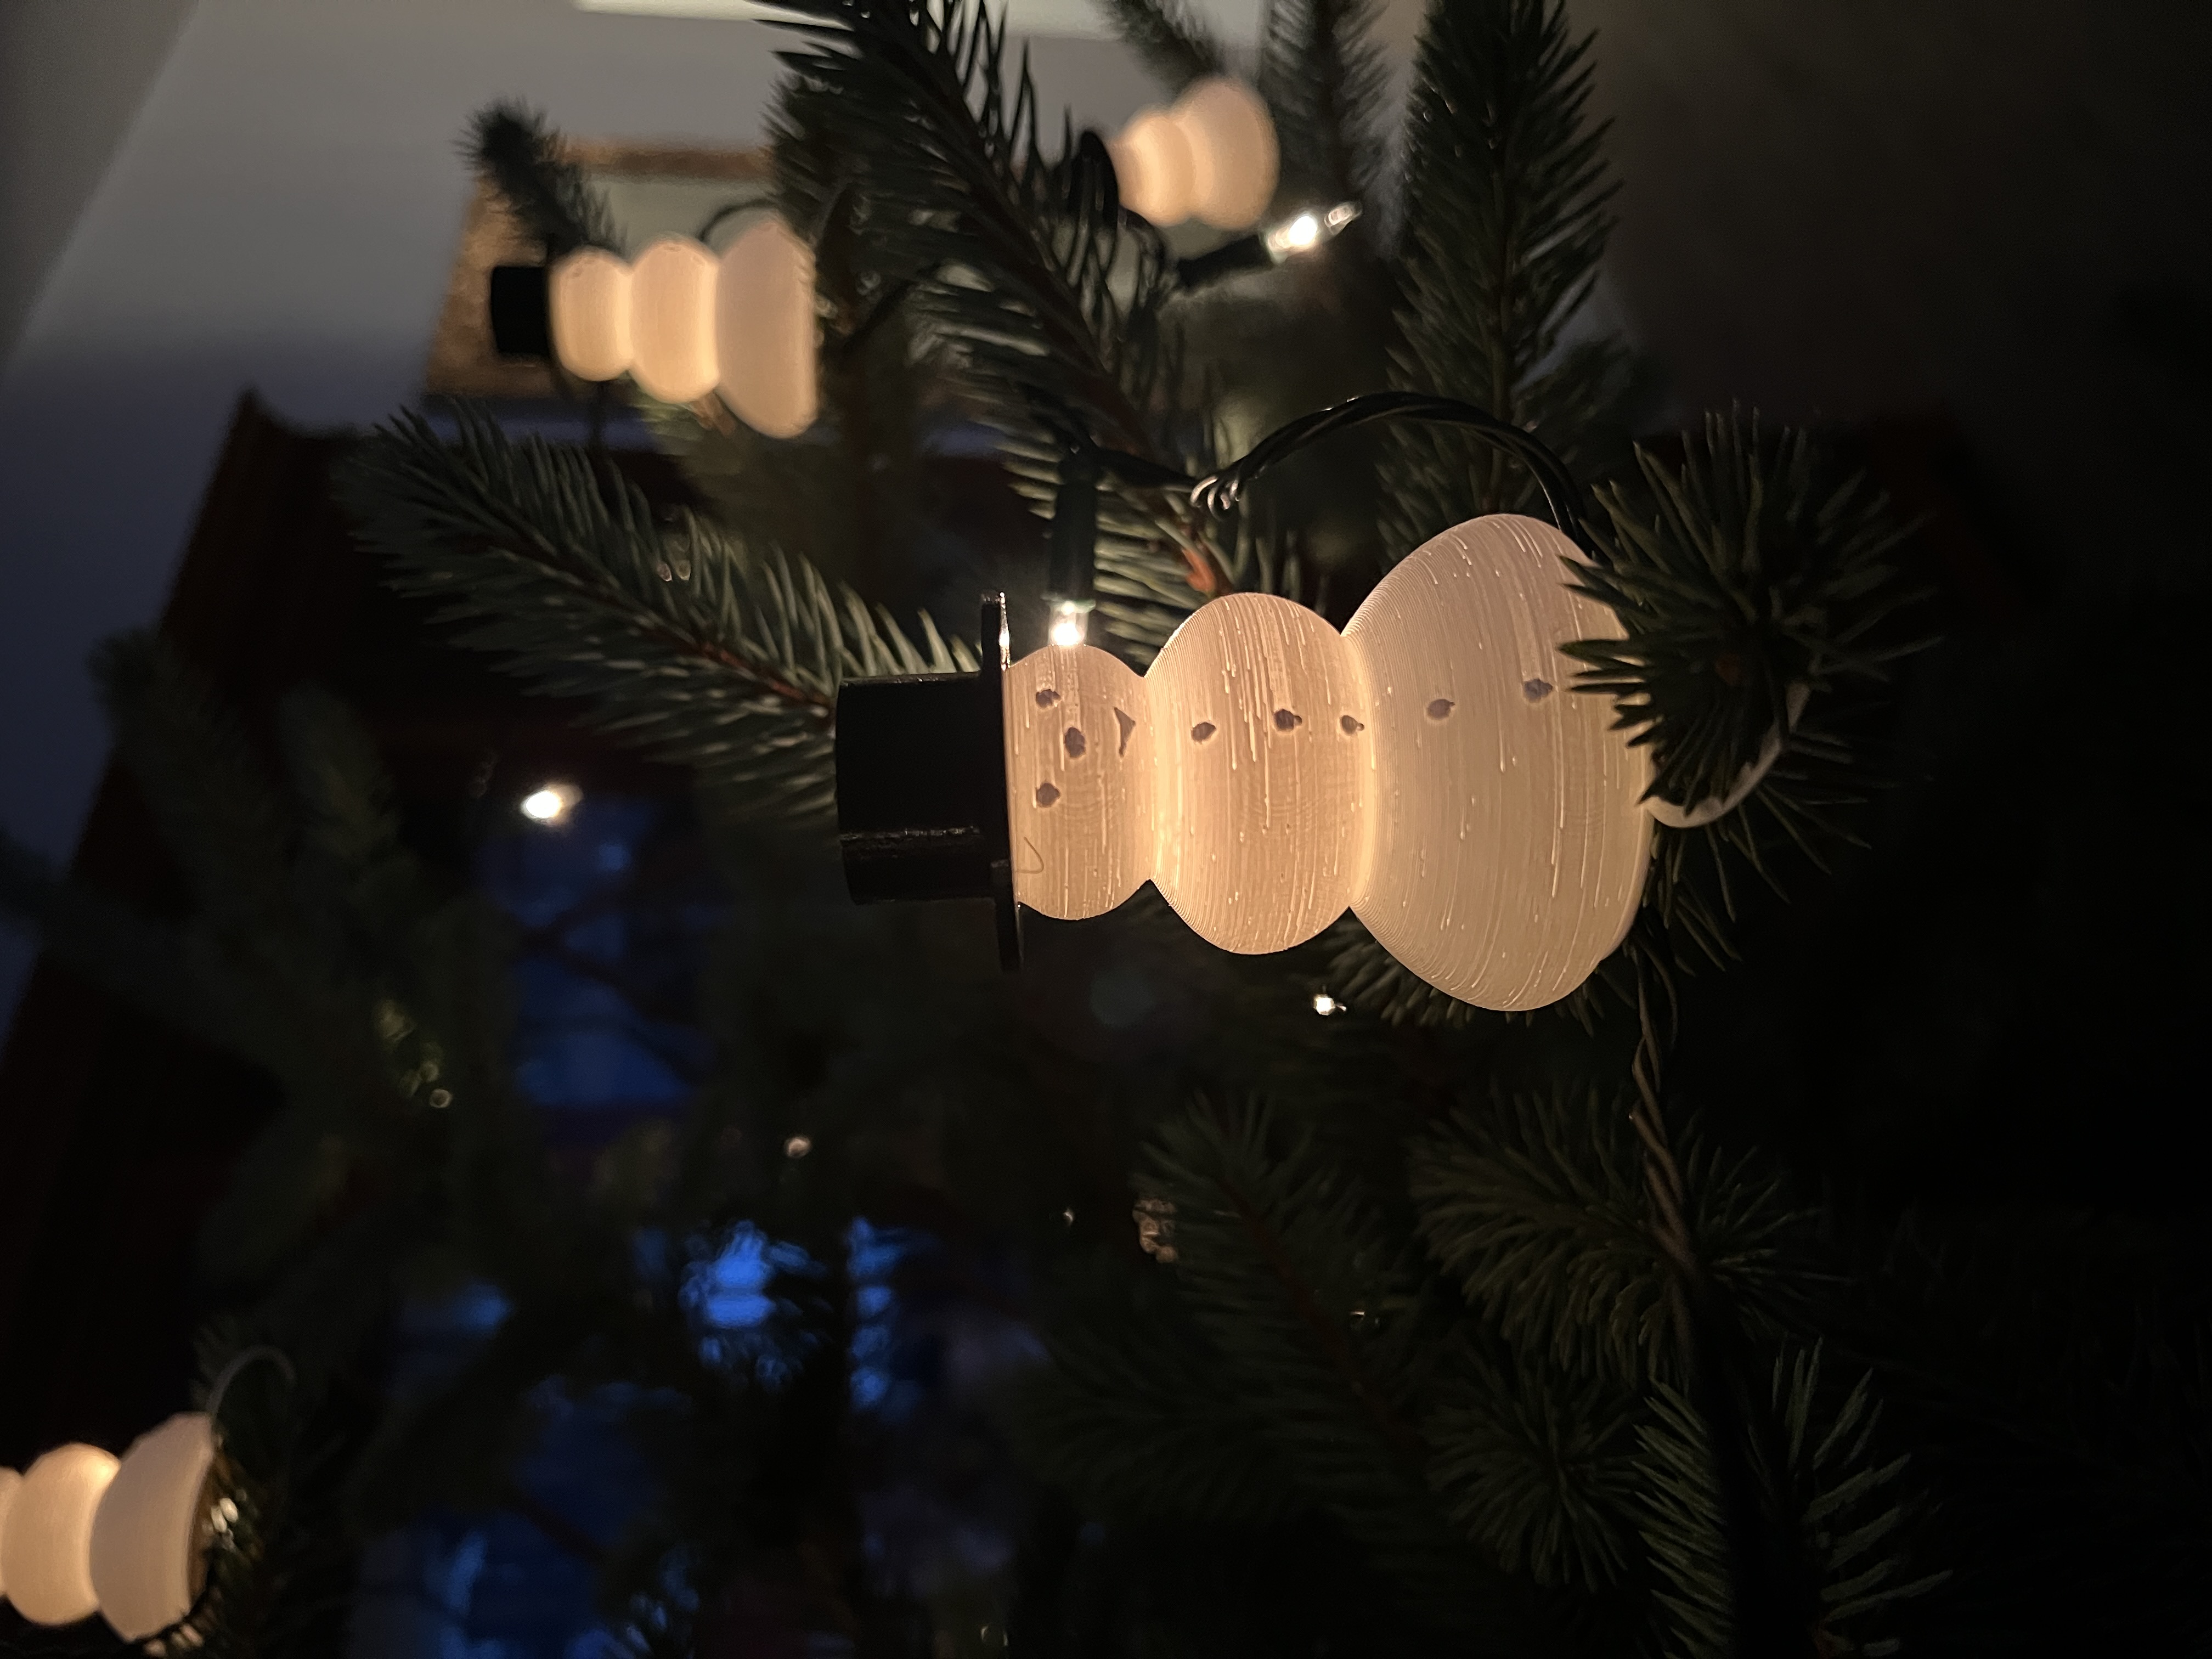 Snowman attachments for chain of lights (for Christmas trees)